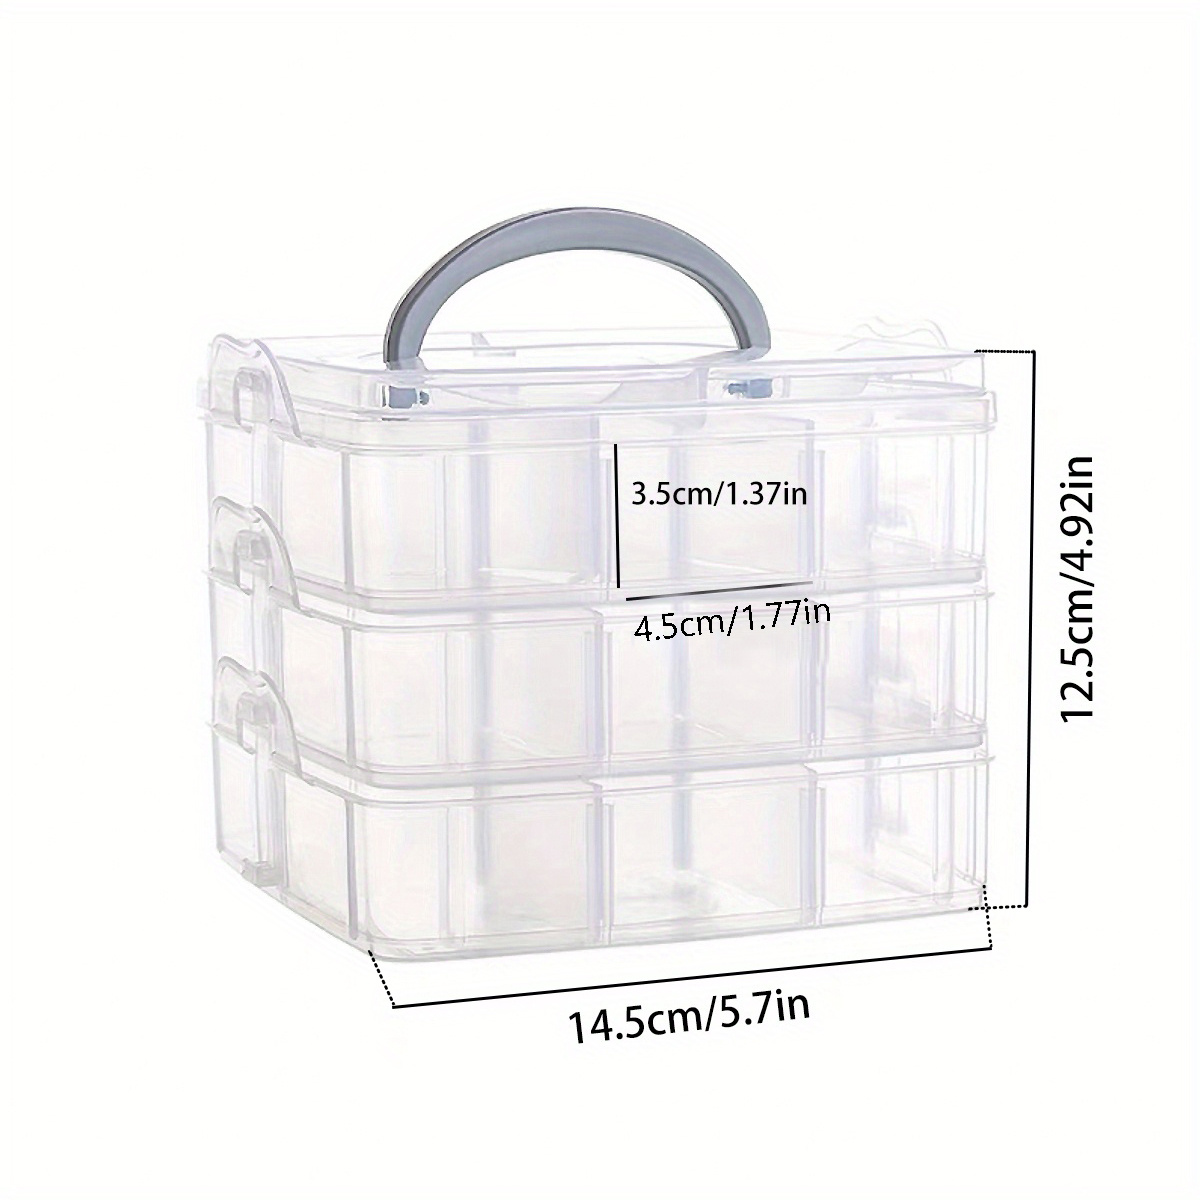 Belle Vous 3 Tier Transparent Plastic Stackable Storage Box - Adjustable Compartment Slots - Max 30 Compartments - Container for Storing & Organi